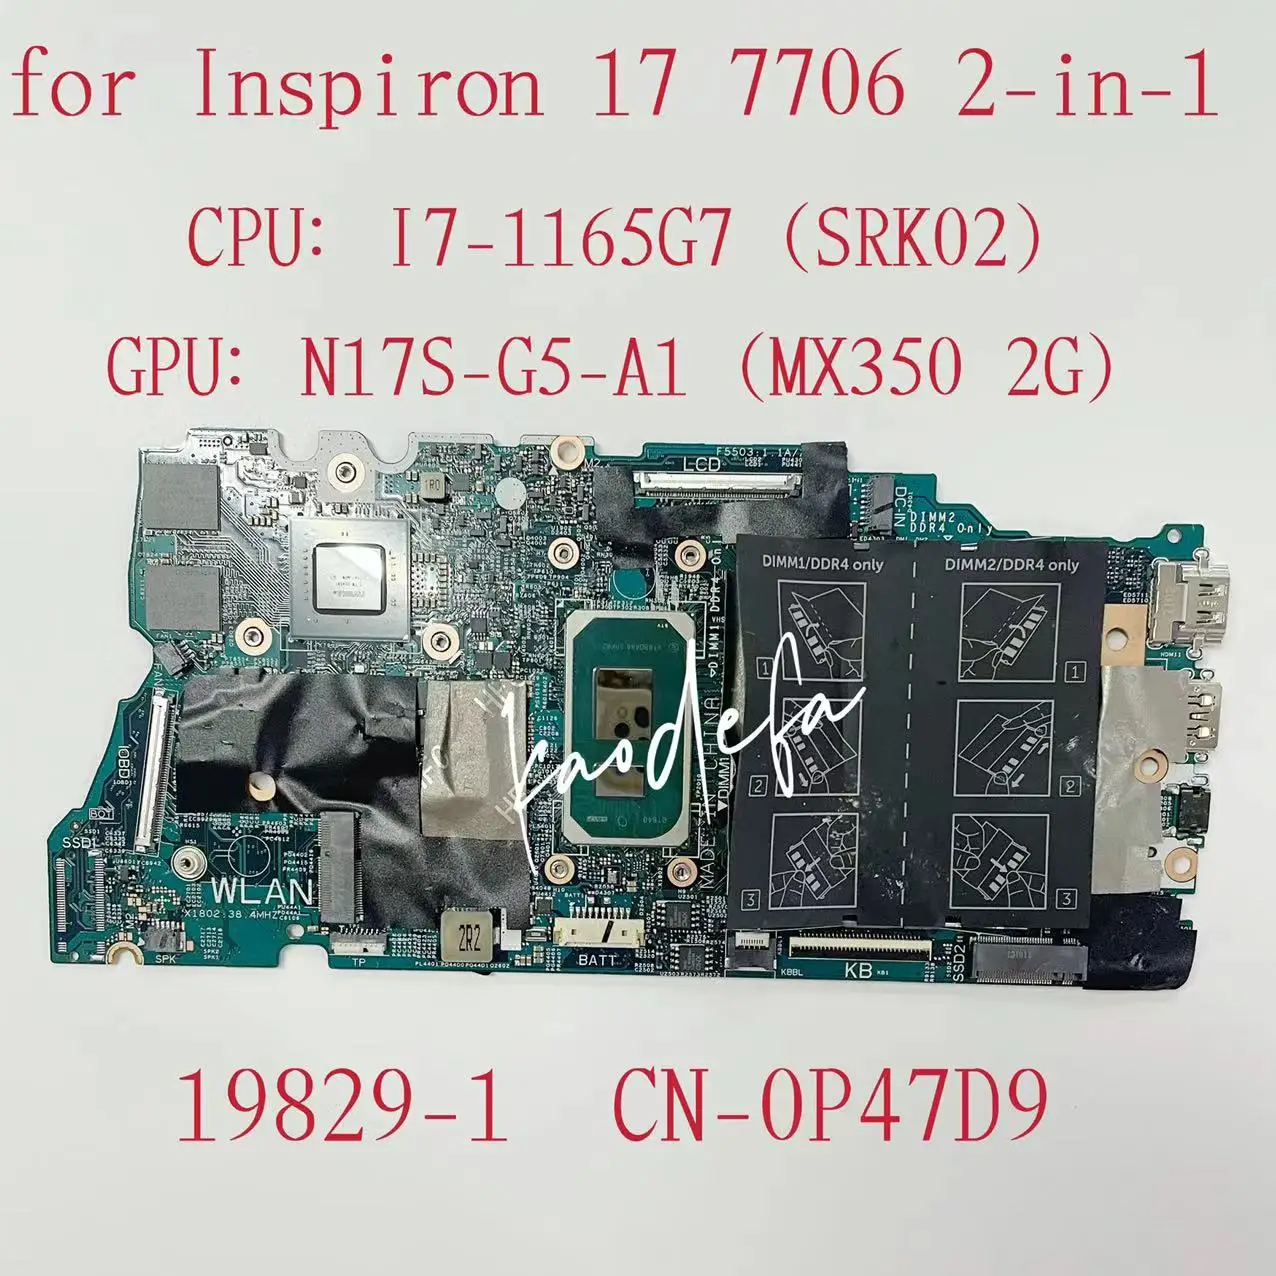 

19829-1 Mainboard For DELL Inspiron 17 7706 2-in-1 Laptop Motherboard SRK02 I7-1165G7 CPU MX350 2G GPU CN-0P47D9 0P47D9 P47D9